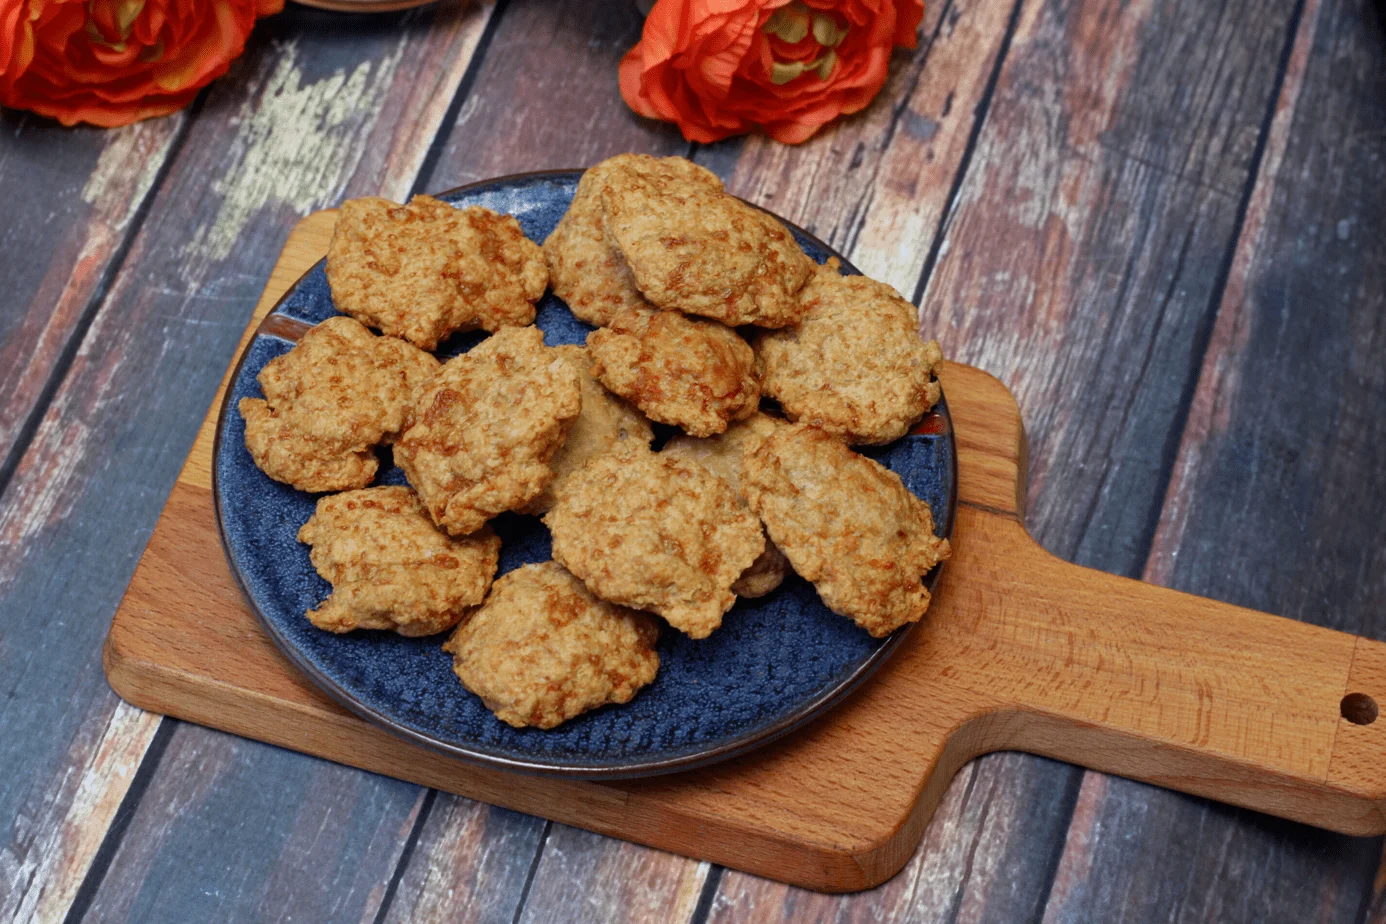 chicken nuggets on a plate